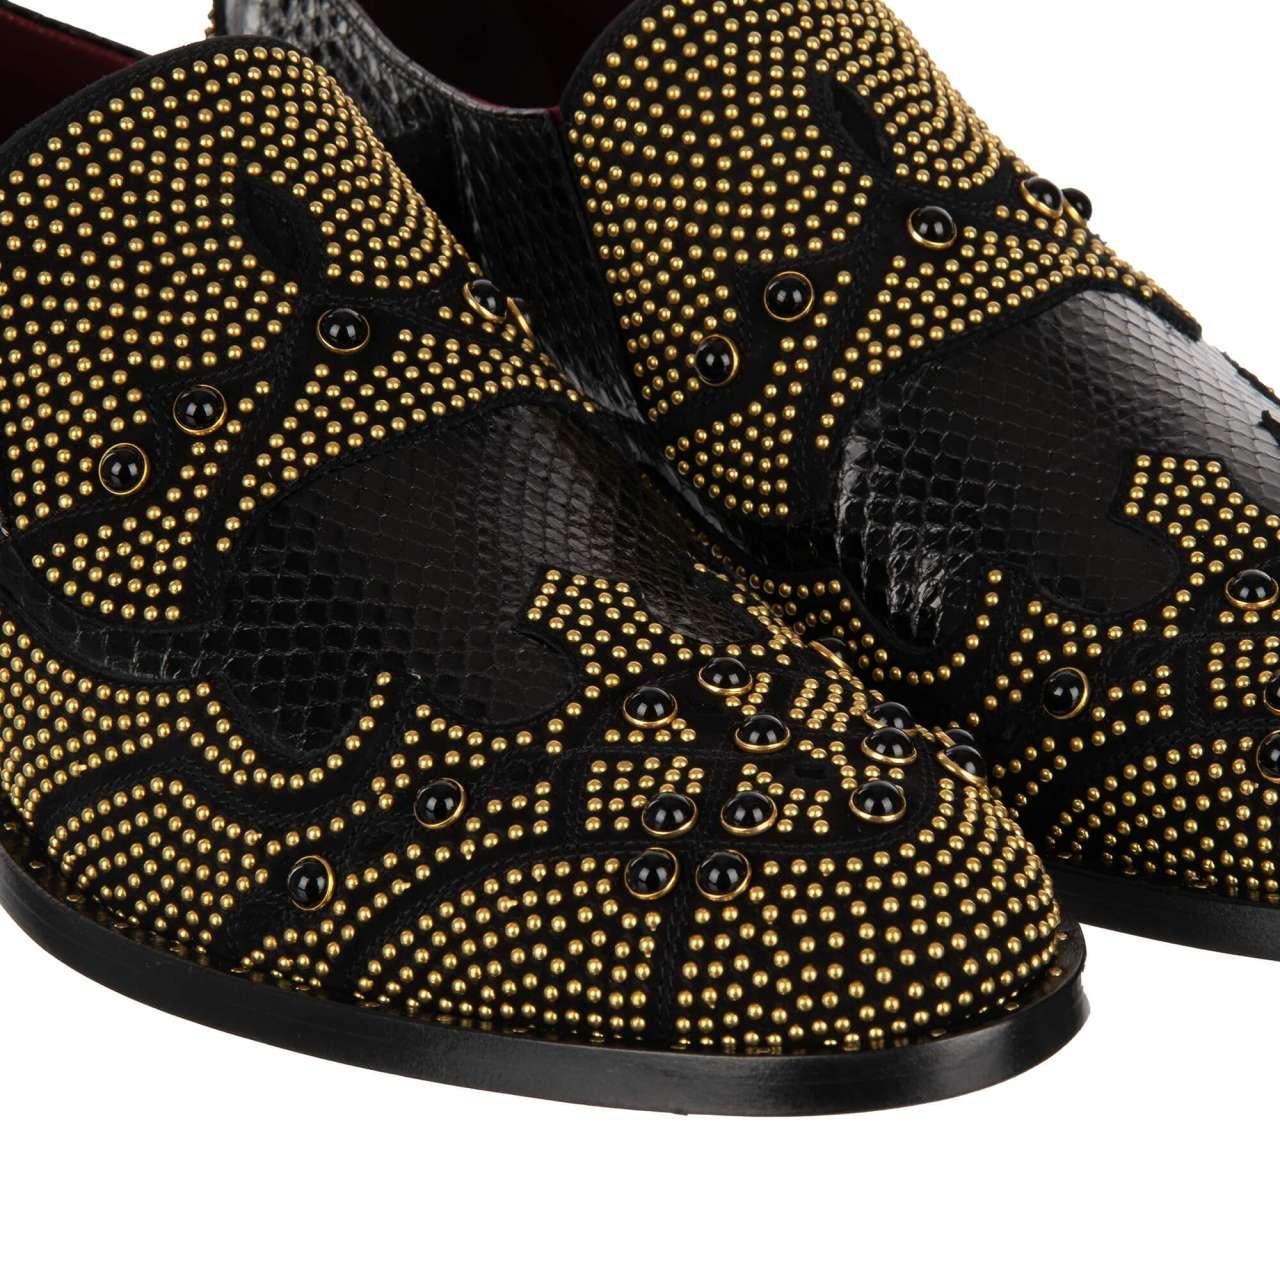 - Snake skin loafer shoes NAPLES with golden and black pearls and studs by DOLCE & GABBANA - MADE IN ITALY - Former RRP: UR 1,899 - New with Box - Model: A50265-A2S36-8B956 - Material: 90% Snake skin, 10% Goatskin - Sole: Leather - Color: Black /